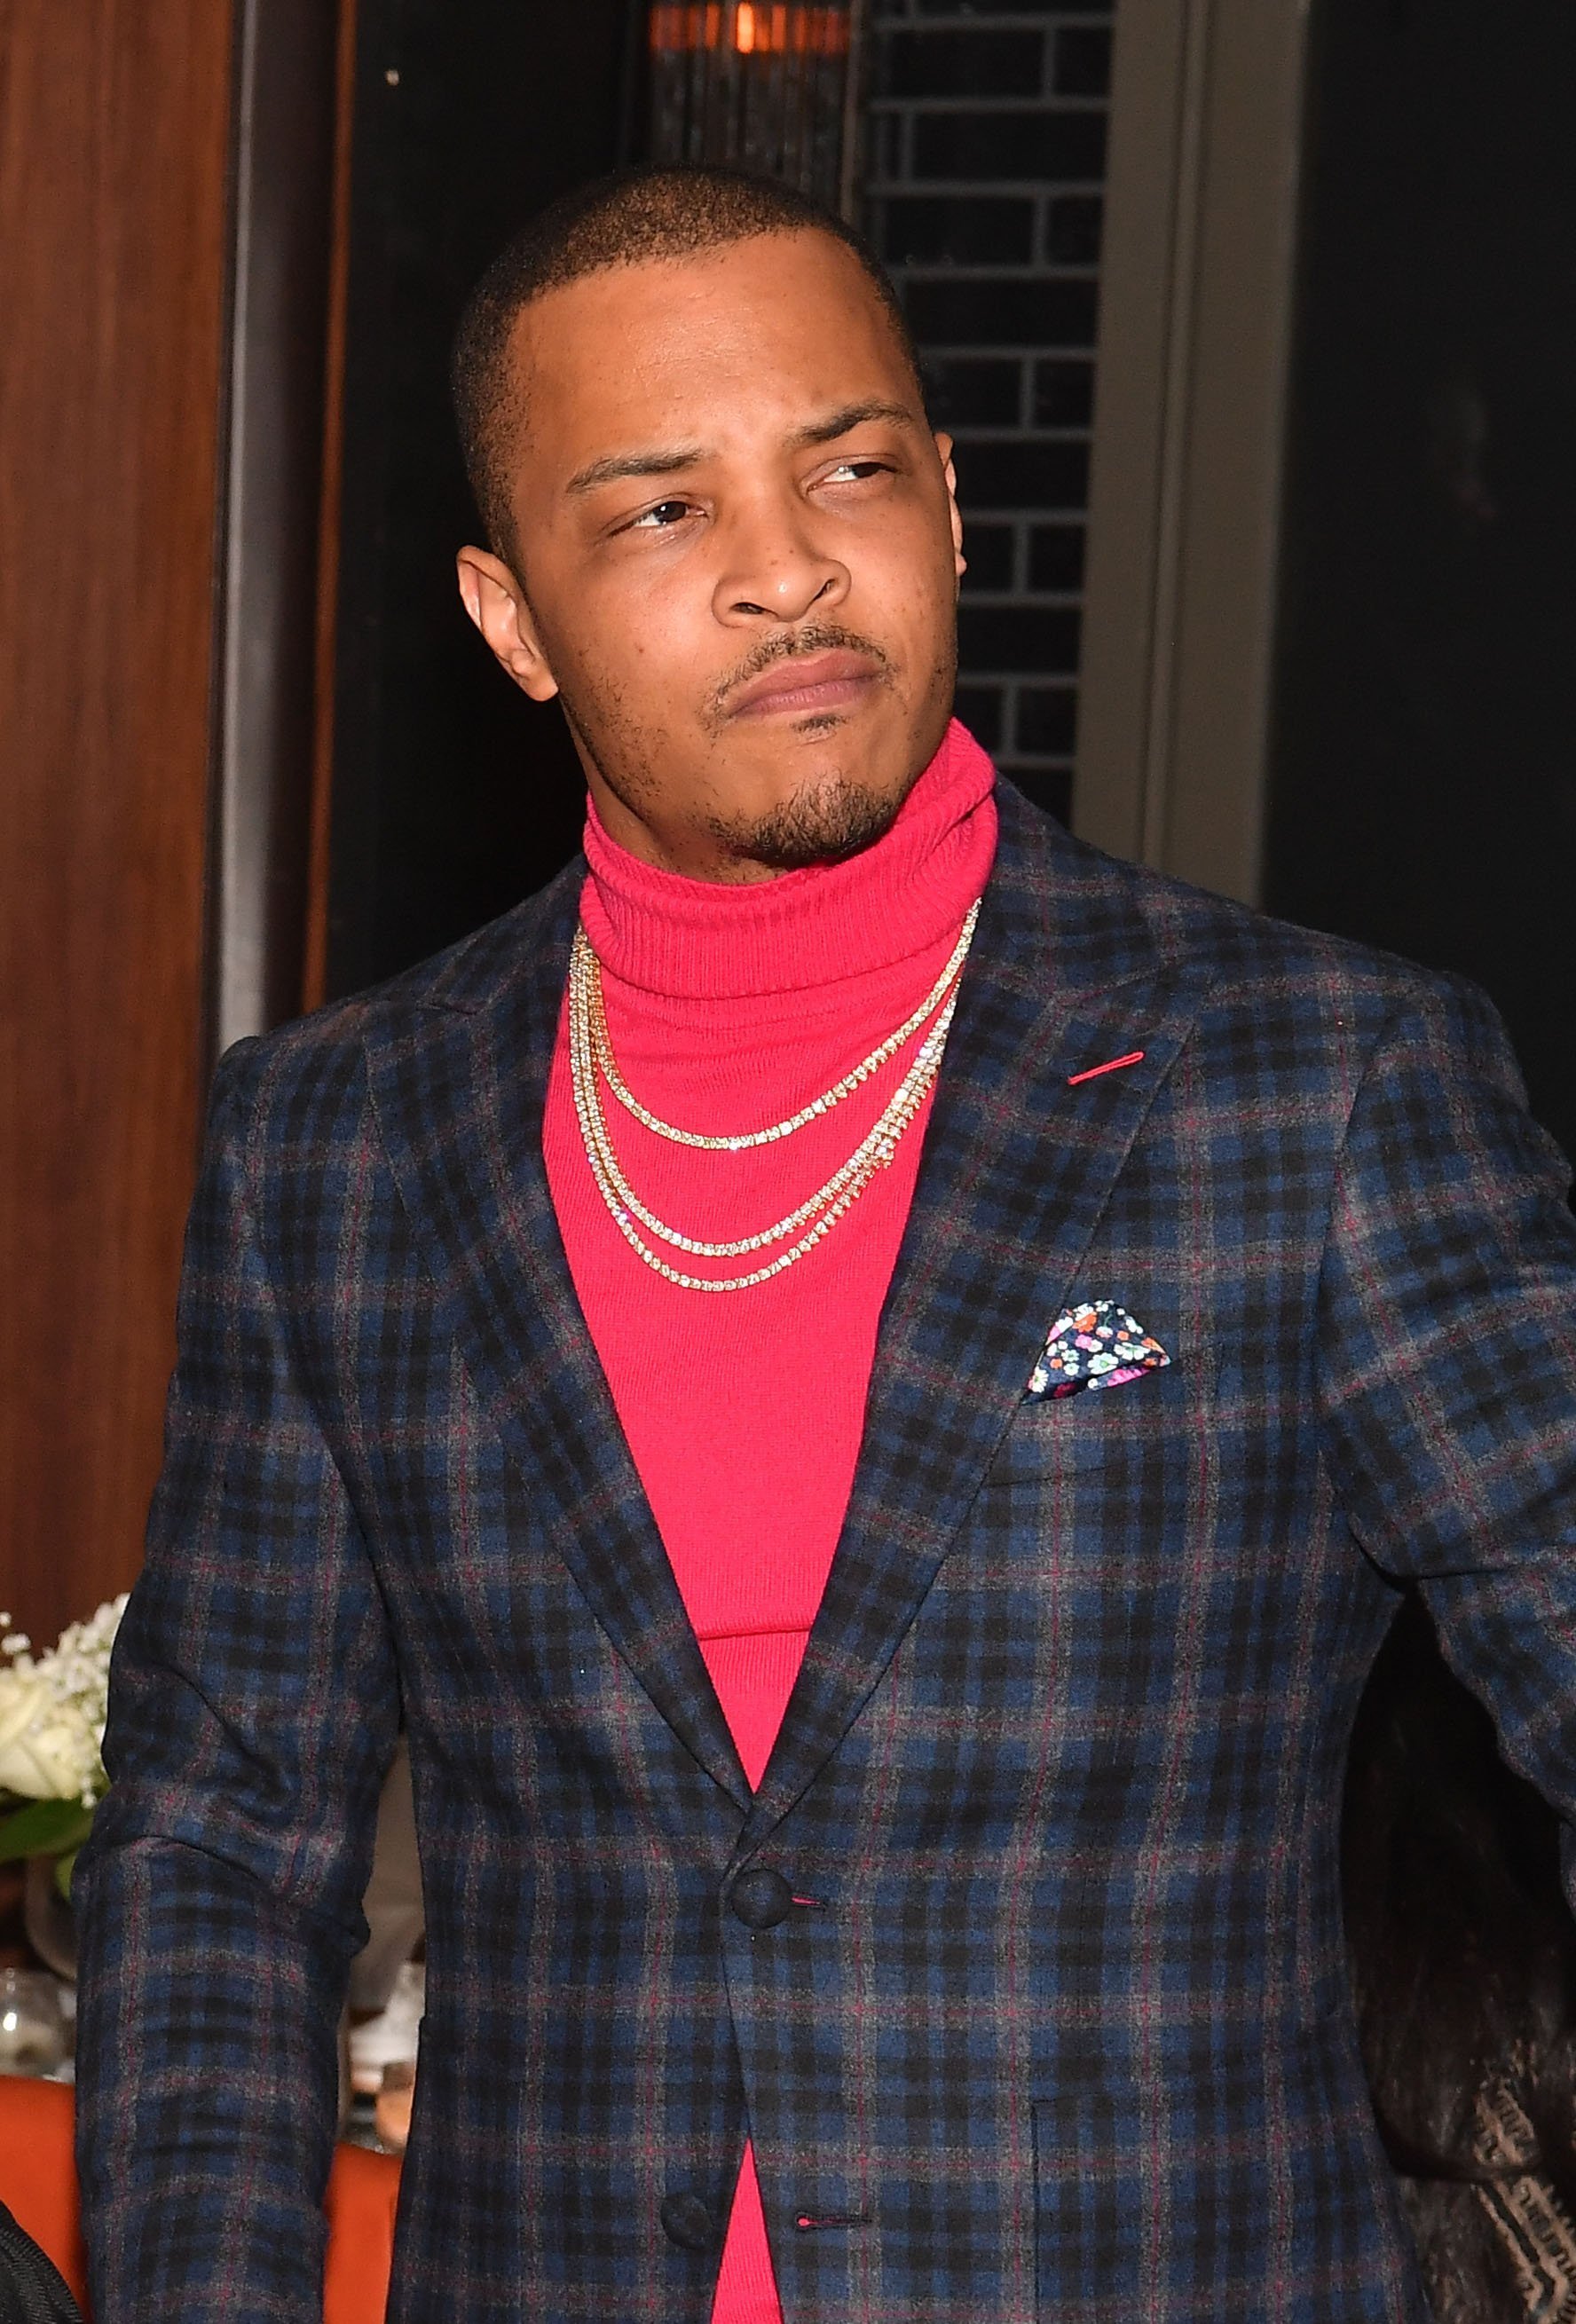 T.I. at A Black Tie Celebration & Toast to David Banner on April 10, 2018 in Georgia | Photo: Getty Images